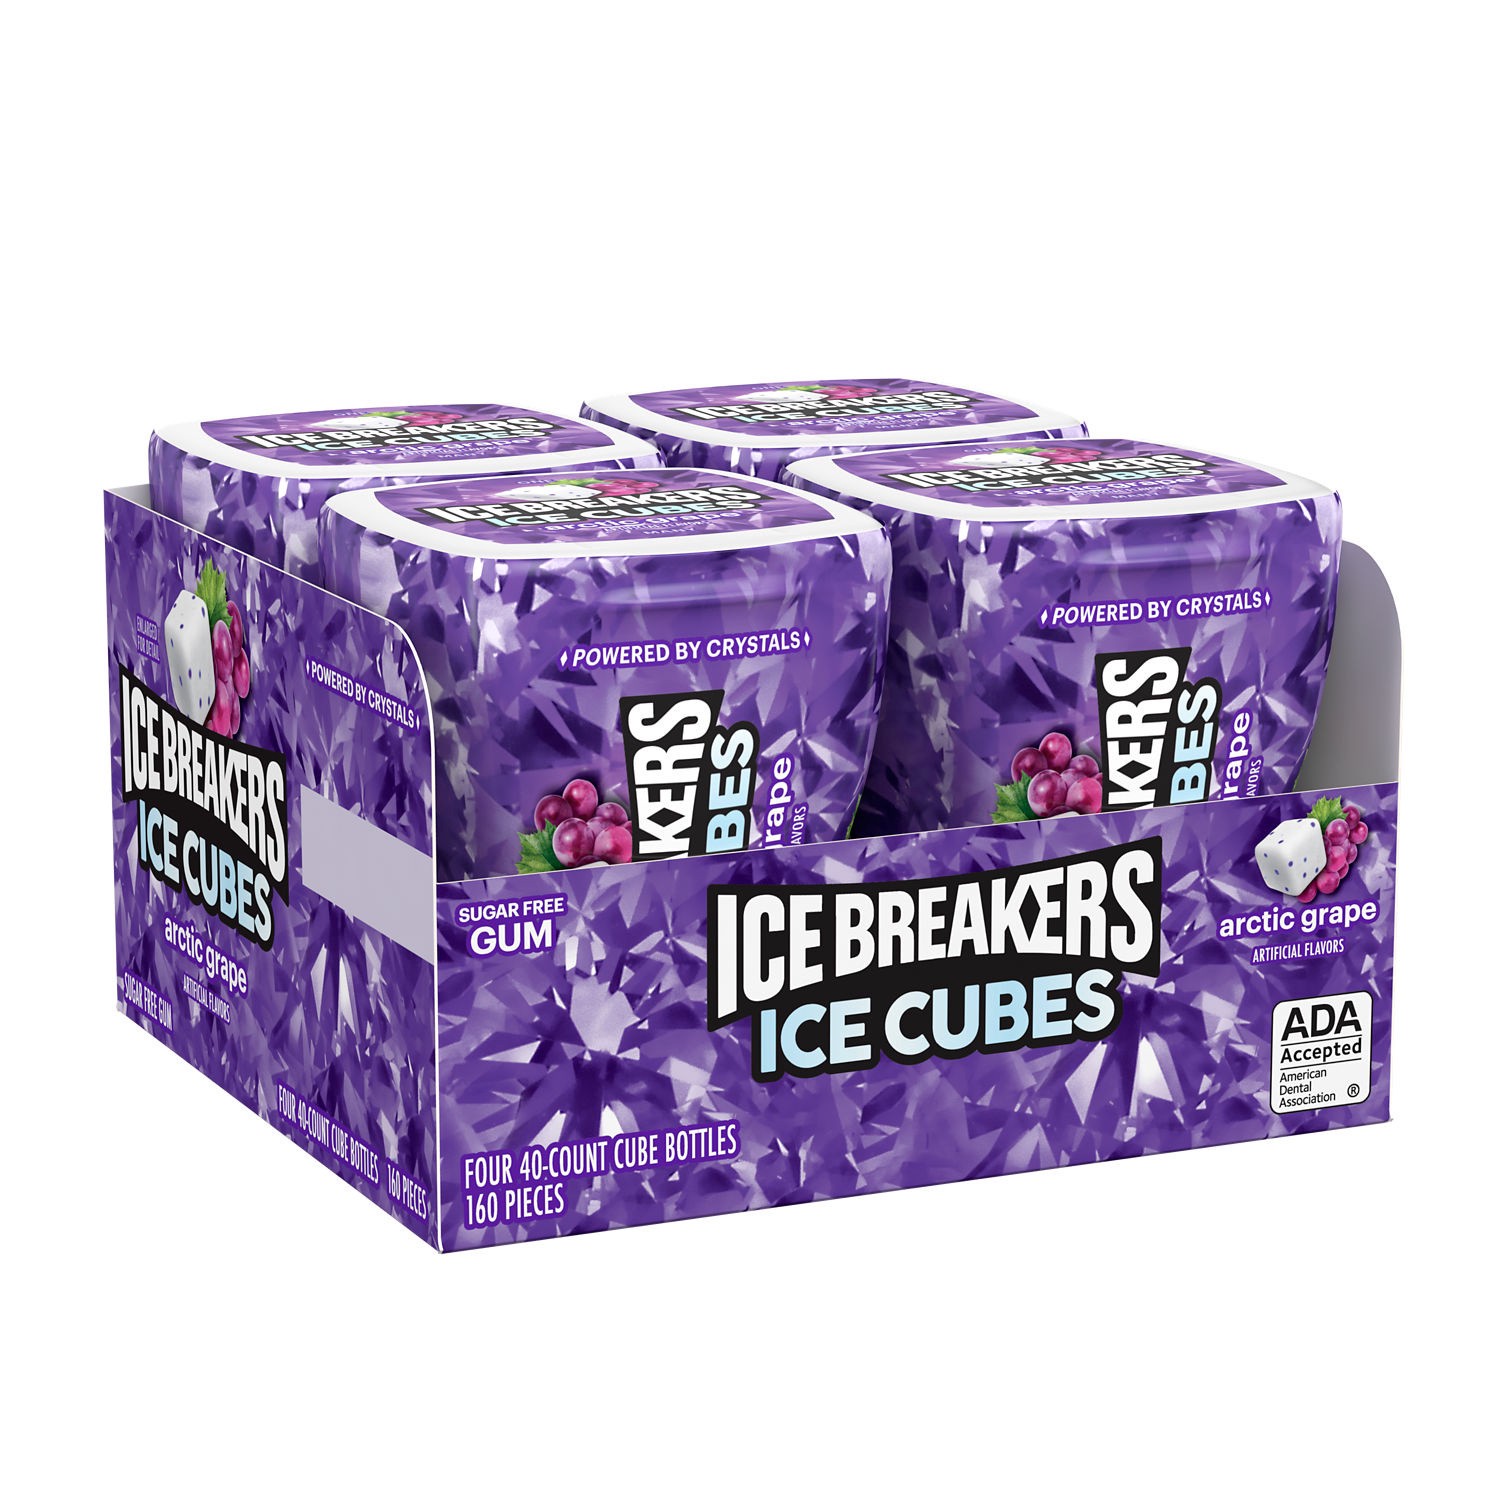 slide 1 of 4, Ice Breakers Ice Cubes Arctic Grape Sugar Free Chewing Gum Bottles, 3.24 oz (4 Count, 40 Pieces), 4 ct